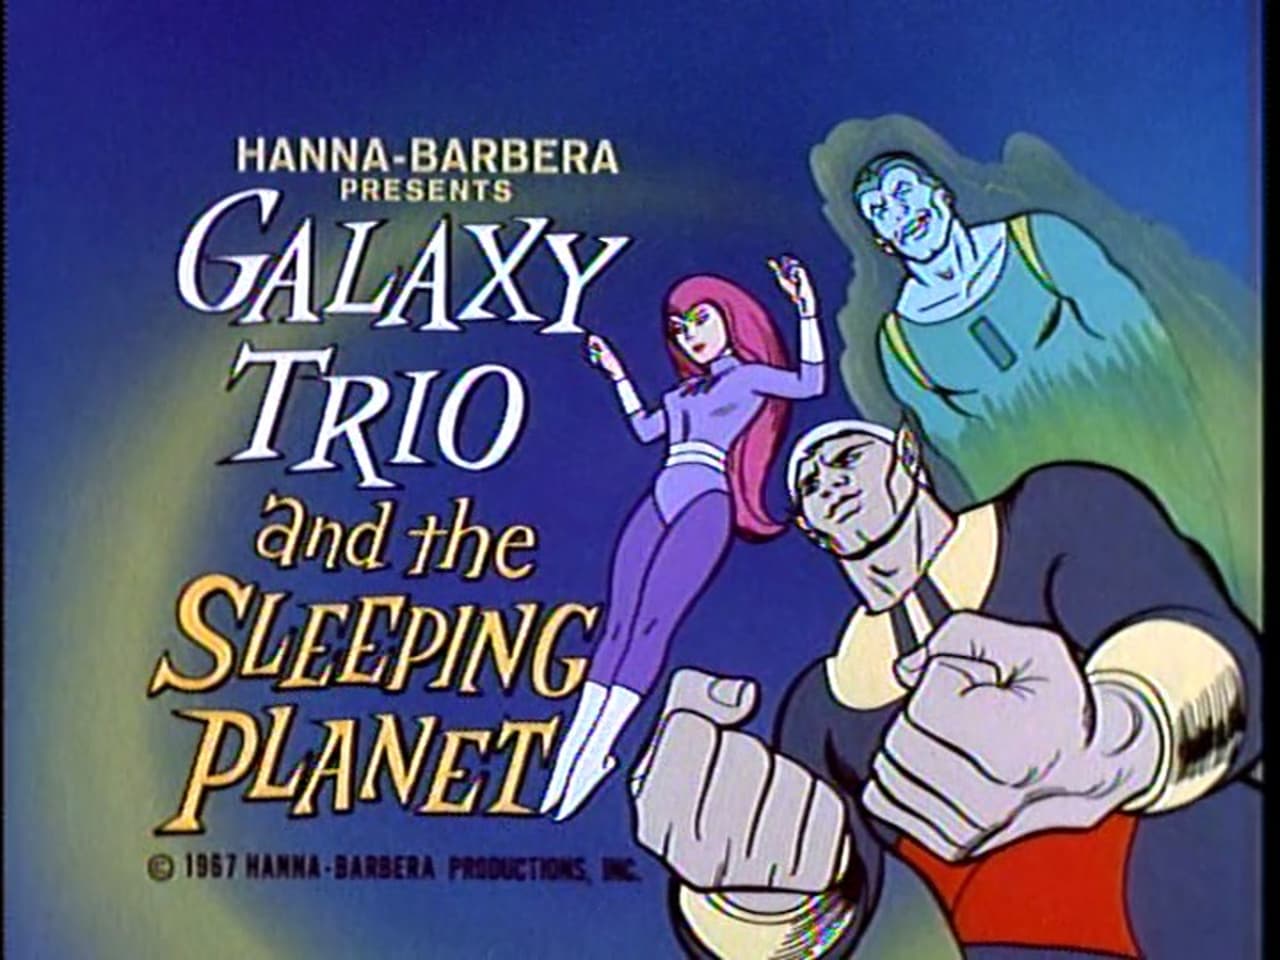 The Galaxy Trio and the Sleeping Planet